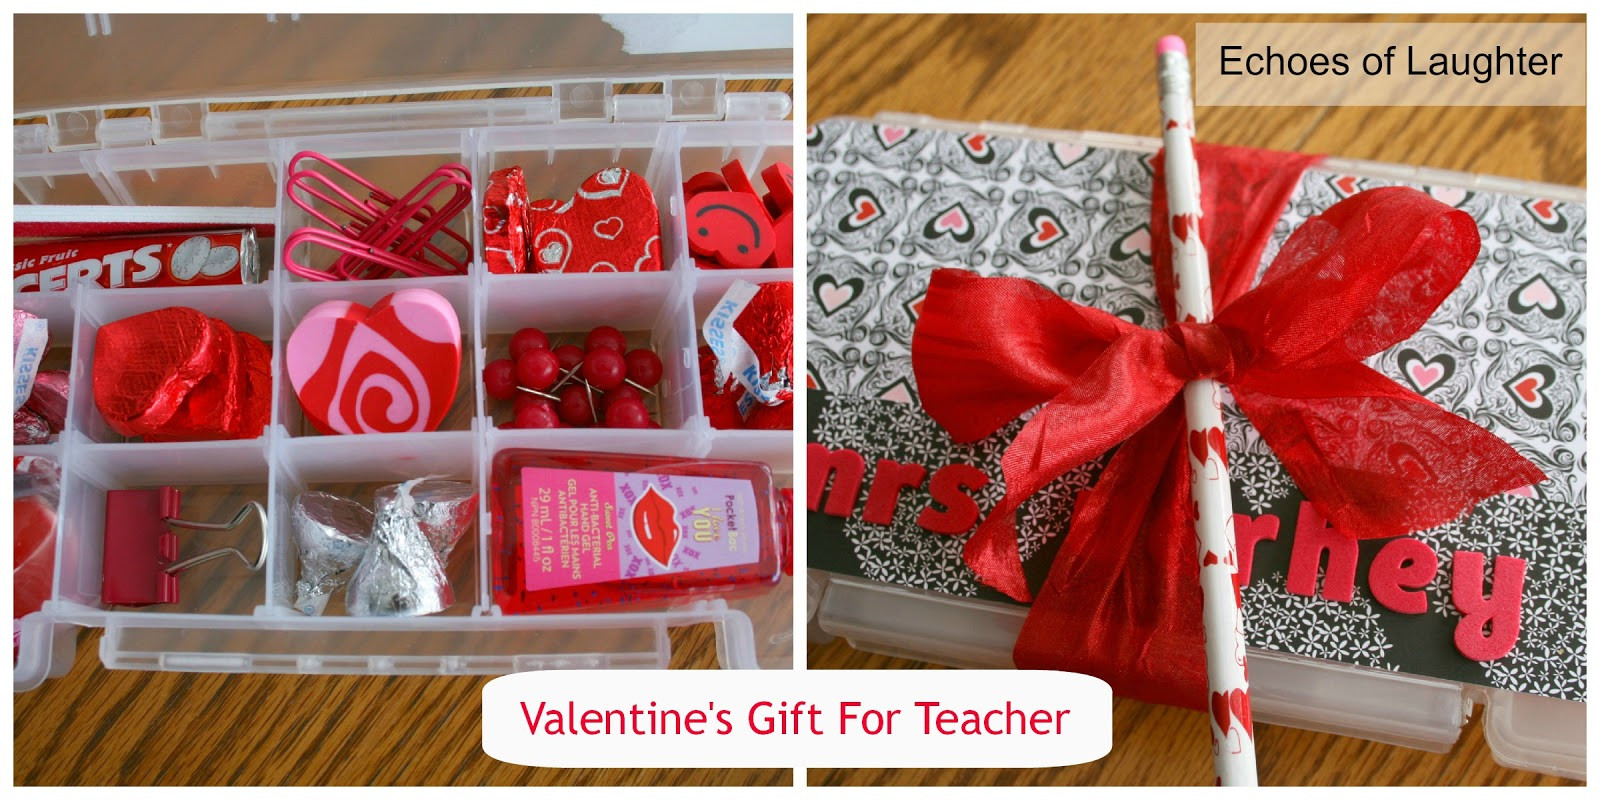 Valentines Day Gift Ideas Teachers
 10 Inspiring Valentine s Ideas Echoes of Laughter